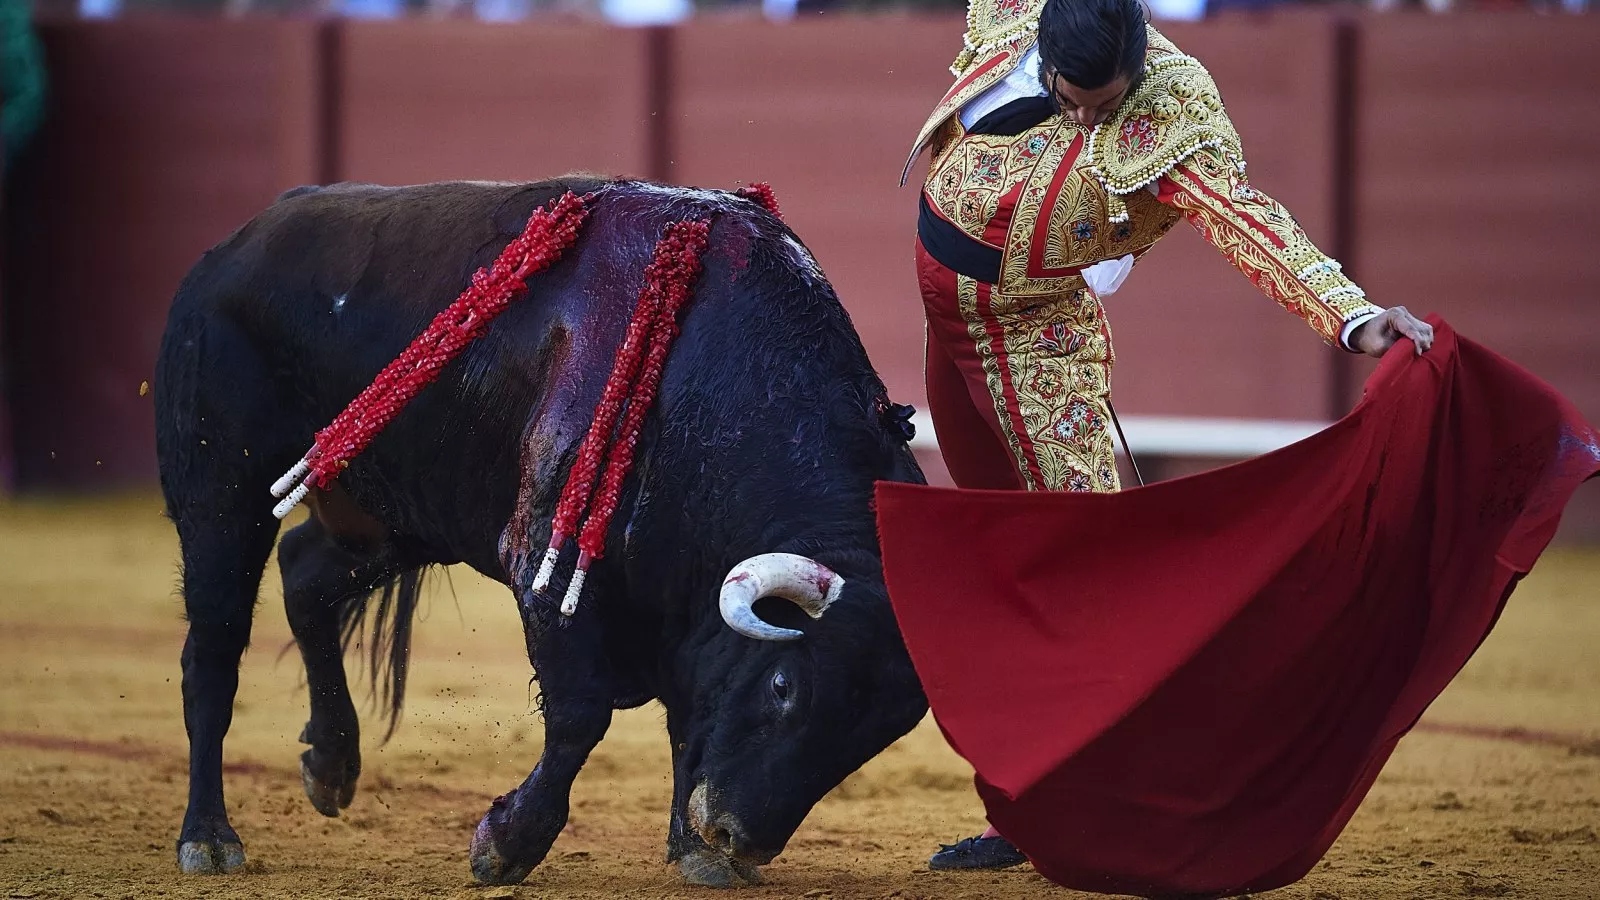 Matador Wipes Tears Away From Bull's Eyes Before Killing It In Shocking Footage